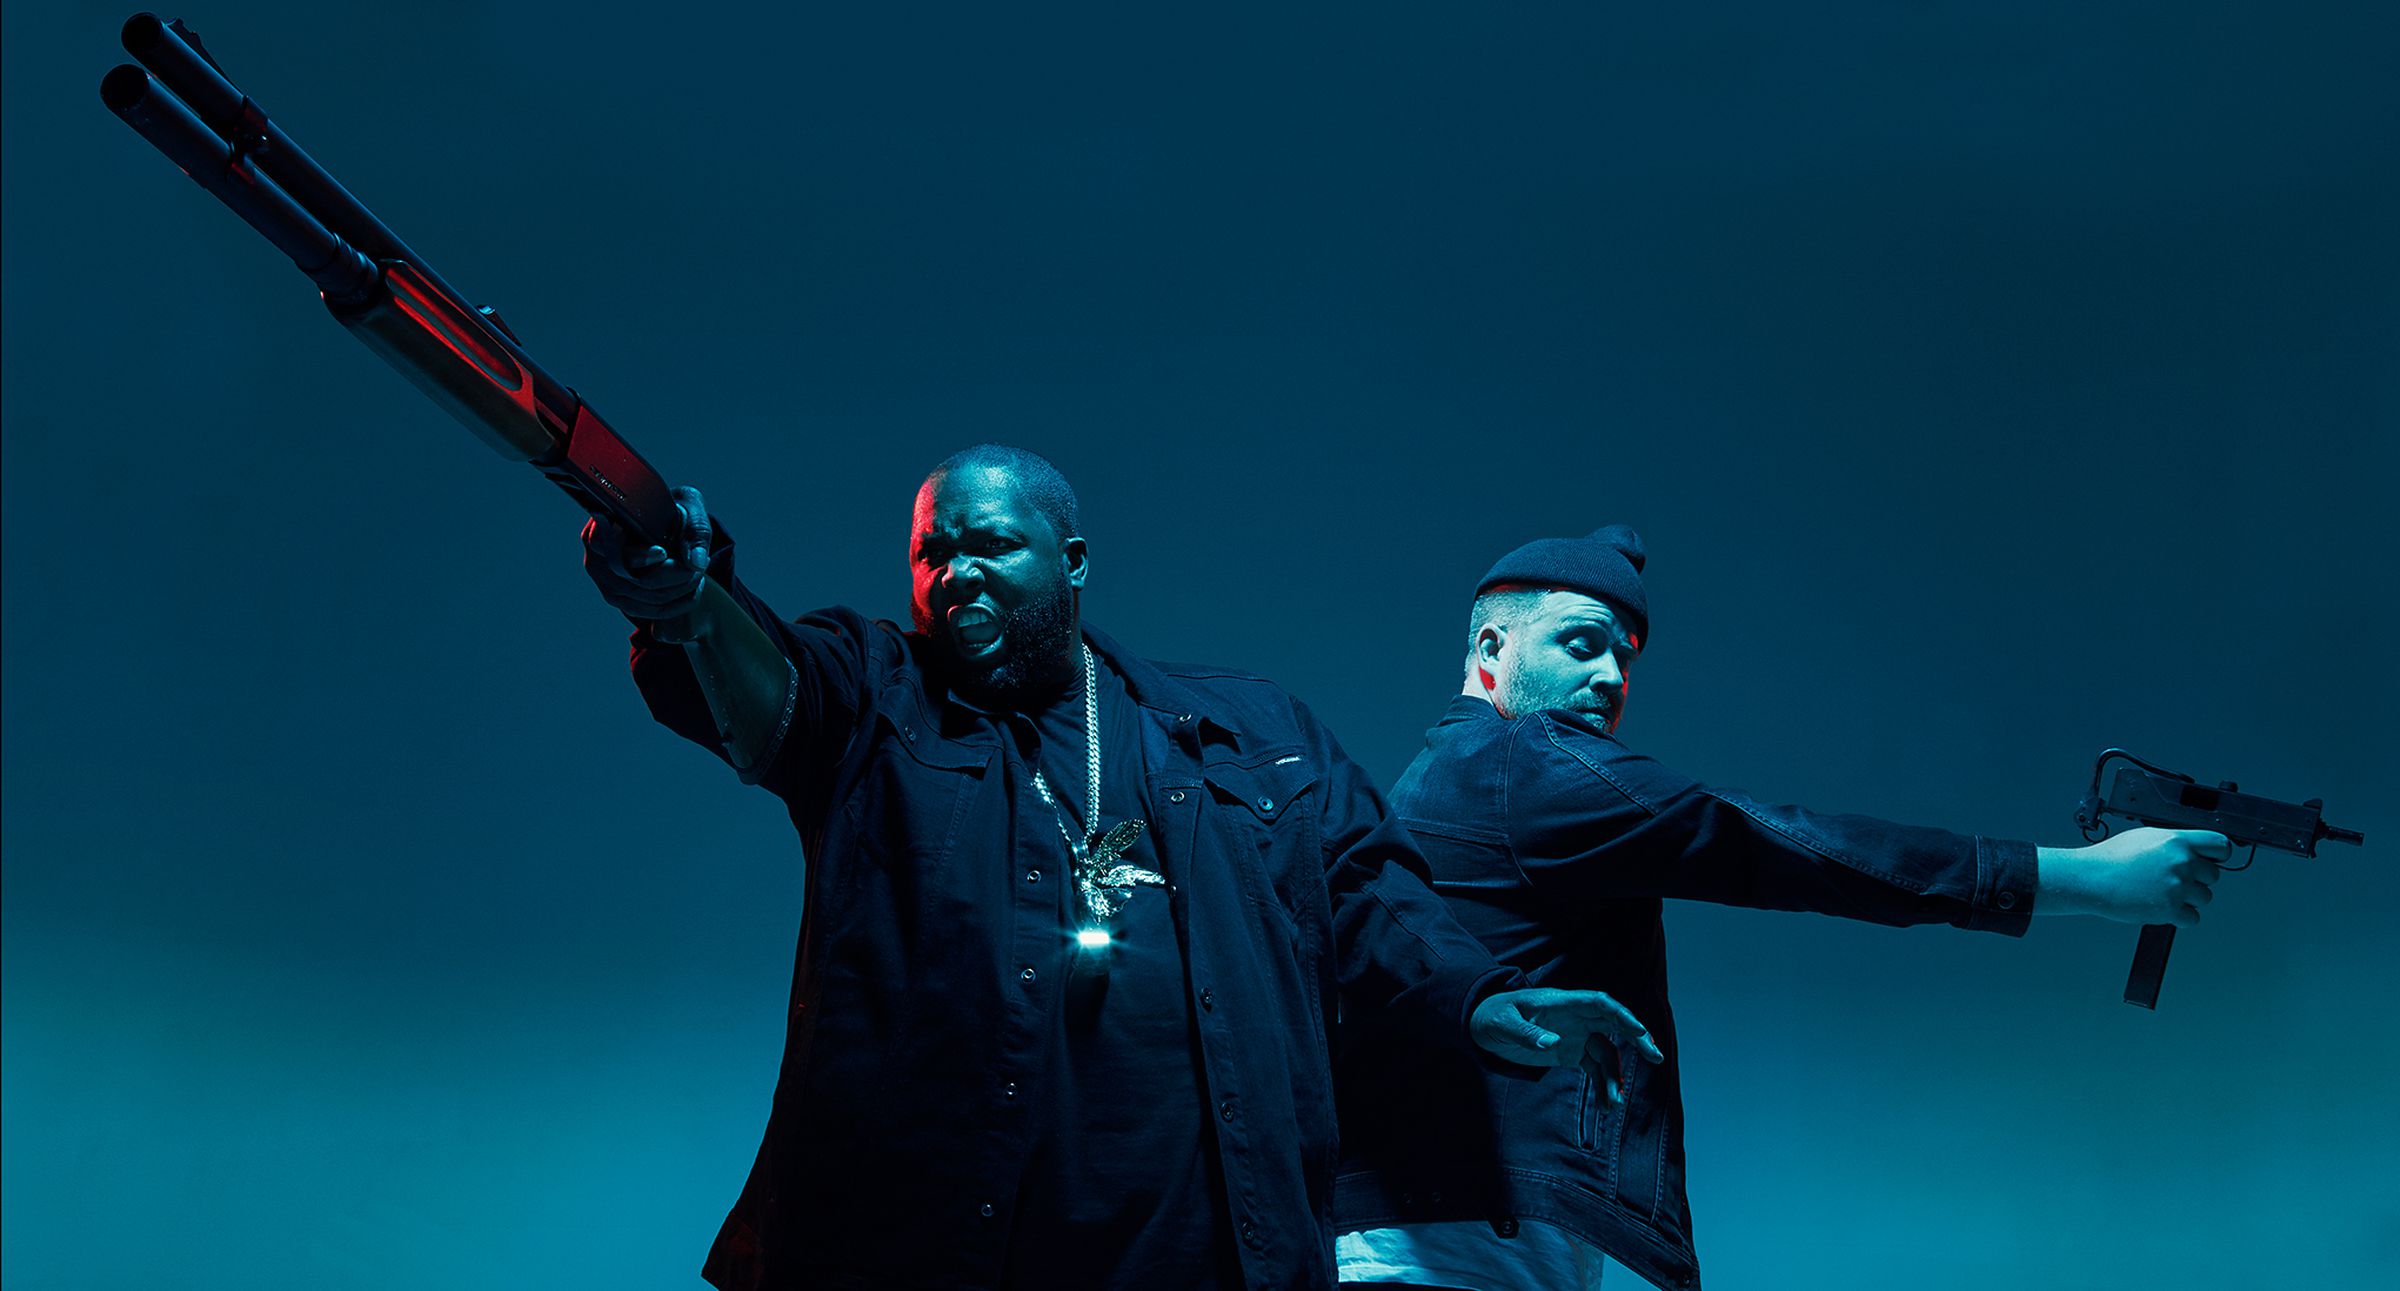 Package artwork for Run The Jewels 3.